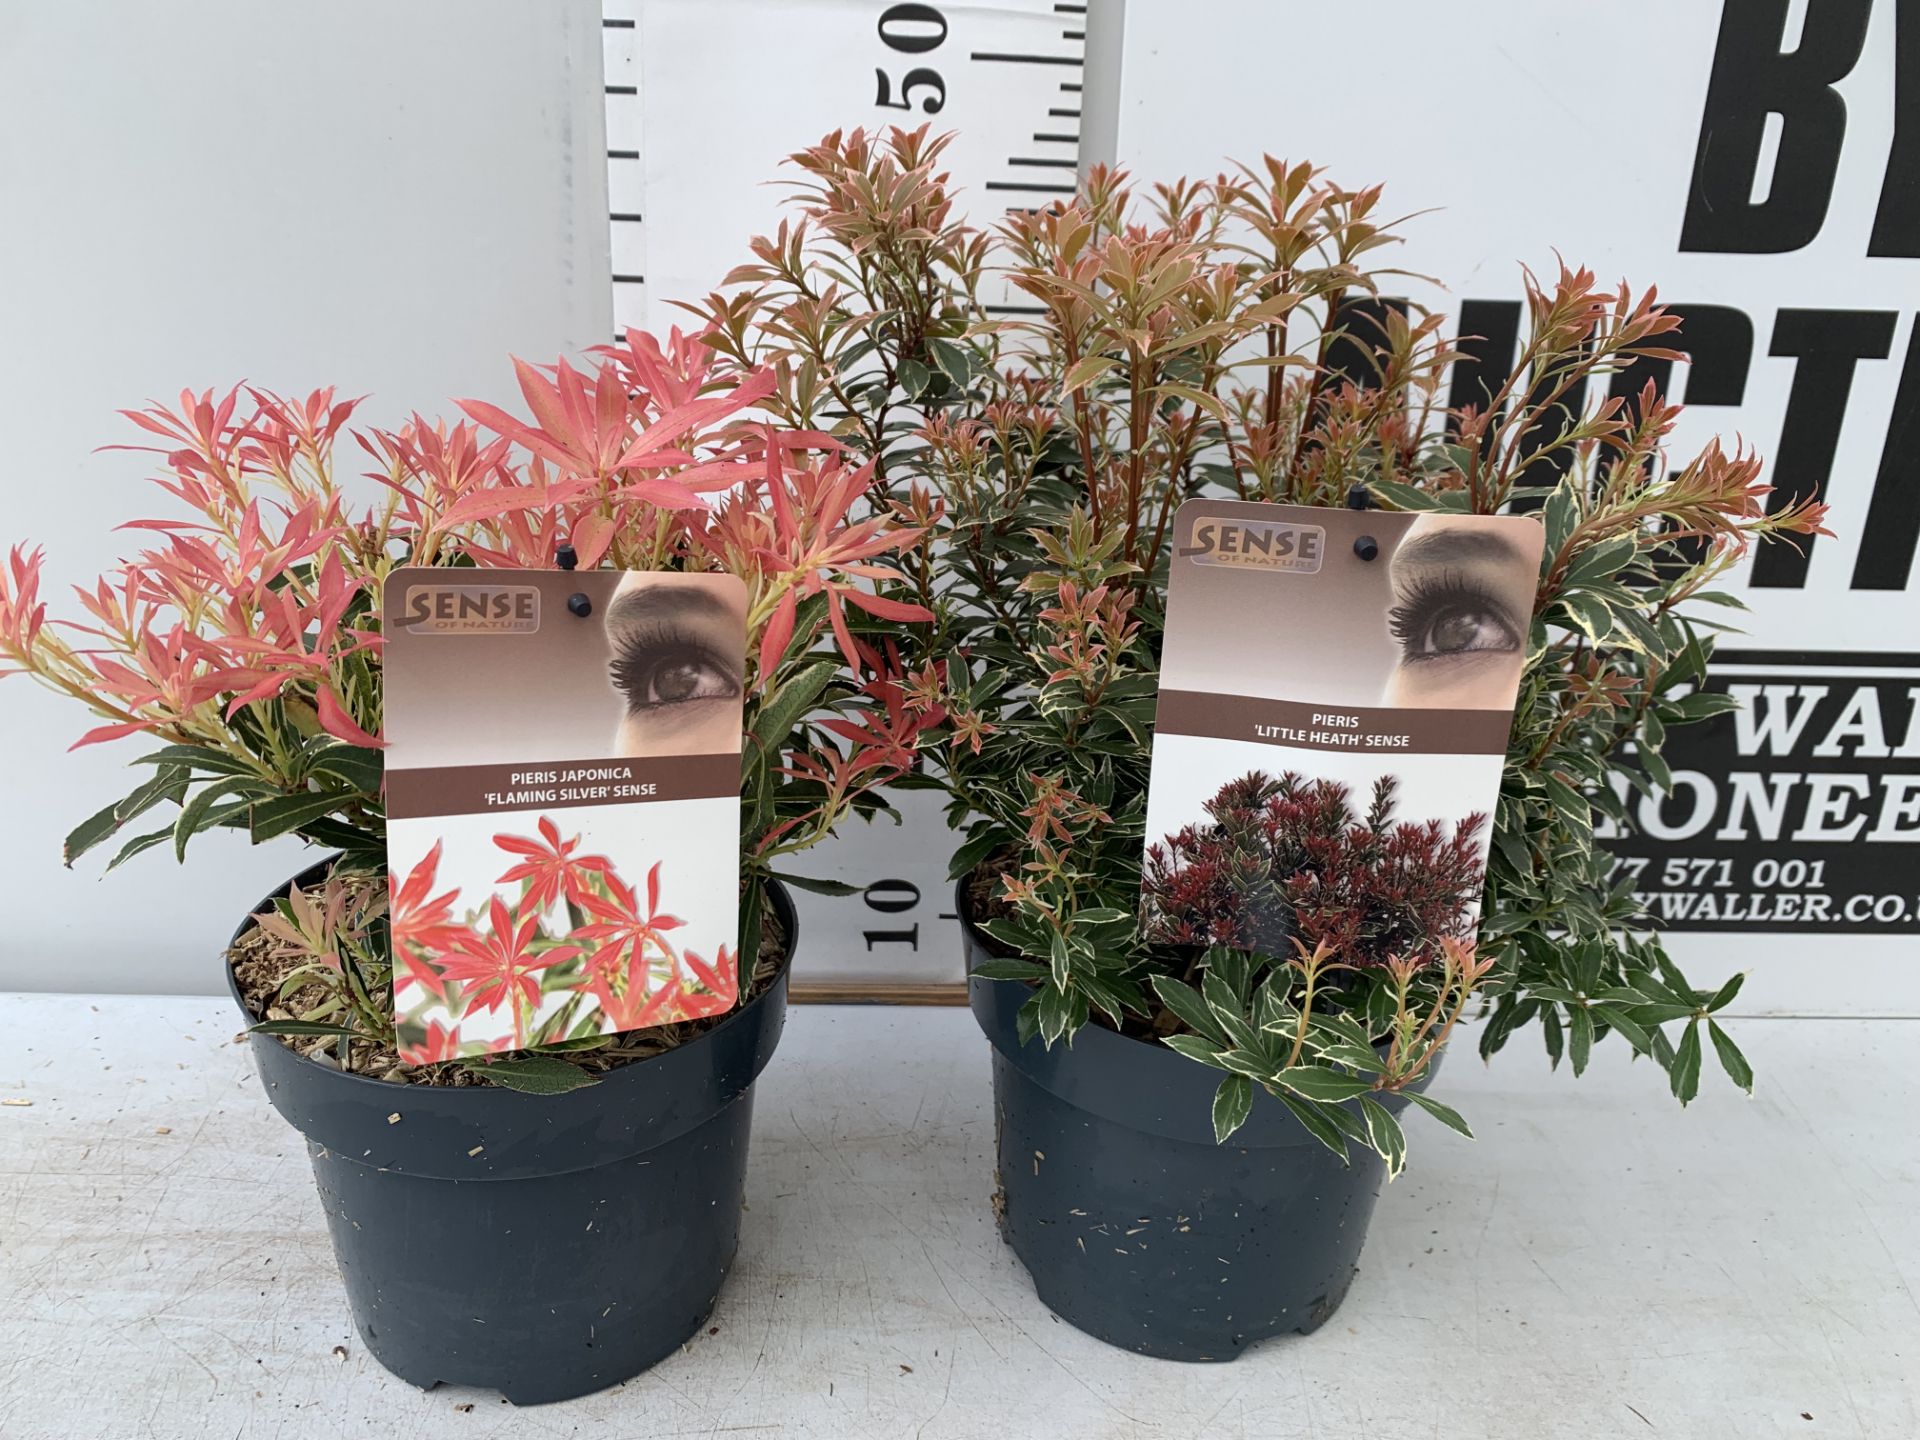 TWO PIERIS JAPONICA LITTLE HEATH AND FLAMING SILVER IN 3 LTR POTS 45CM TALL PLUS VAT TO BE SOLD - Bild 5 aus 10